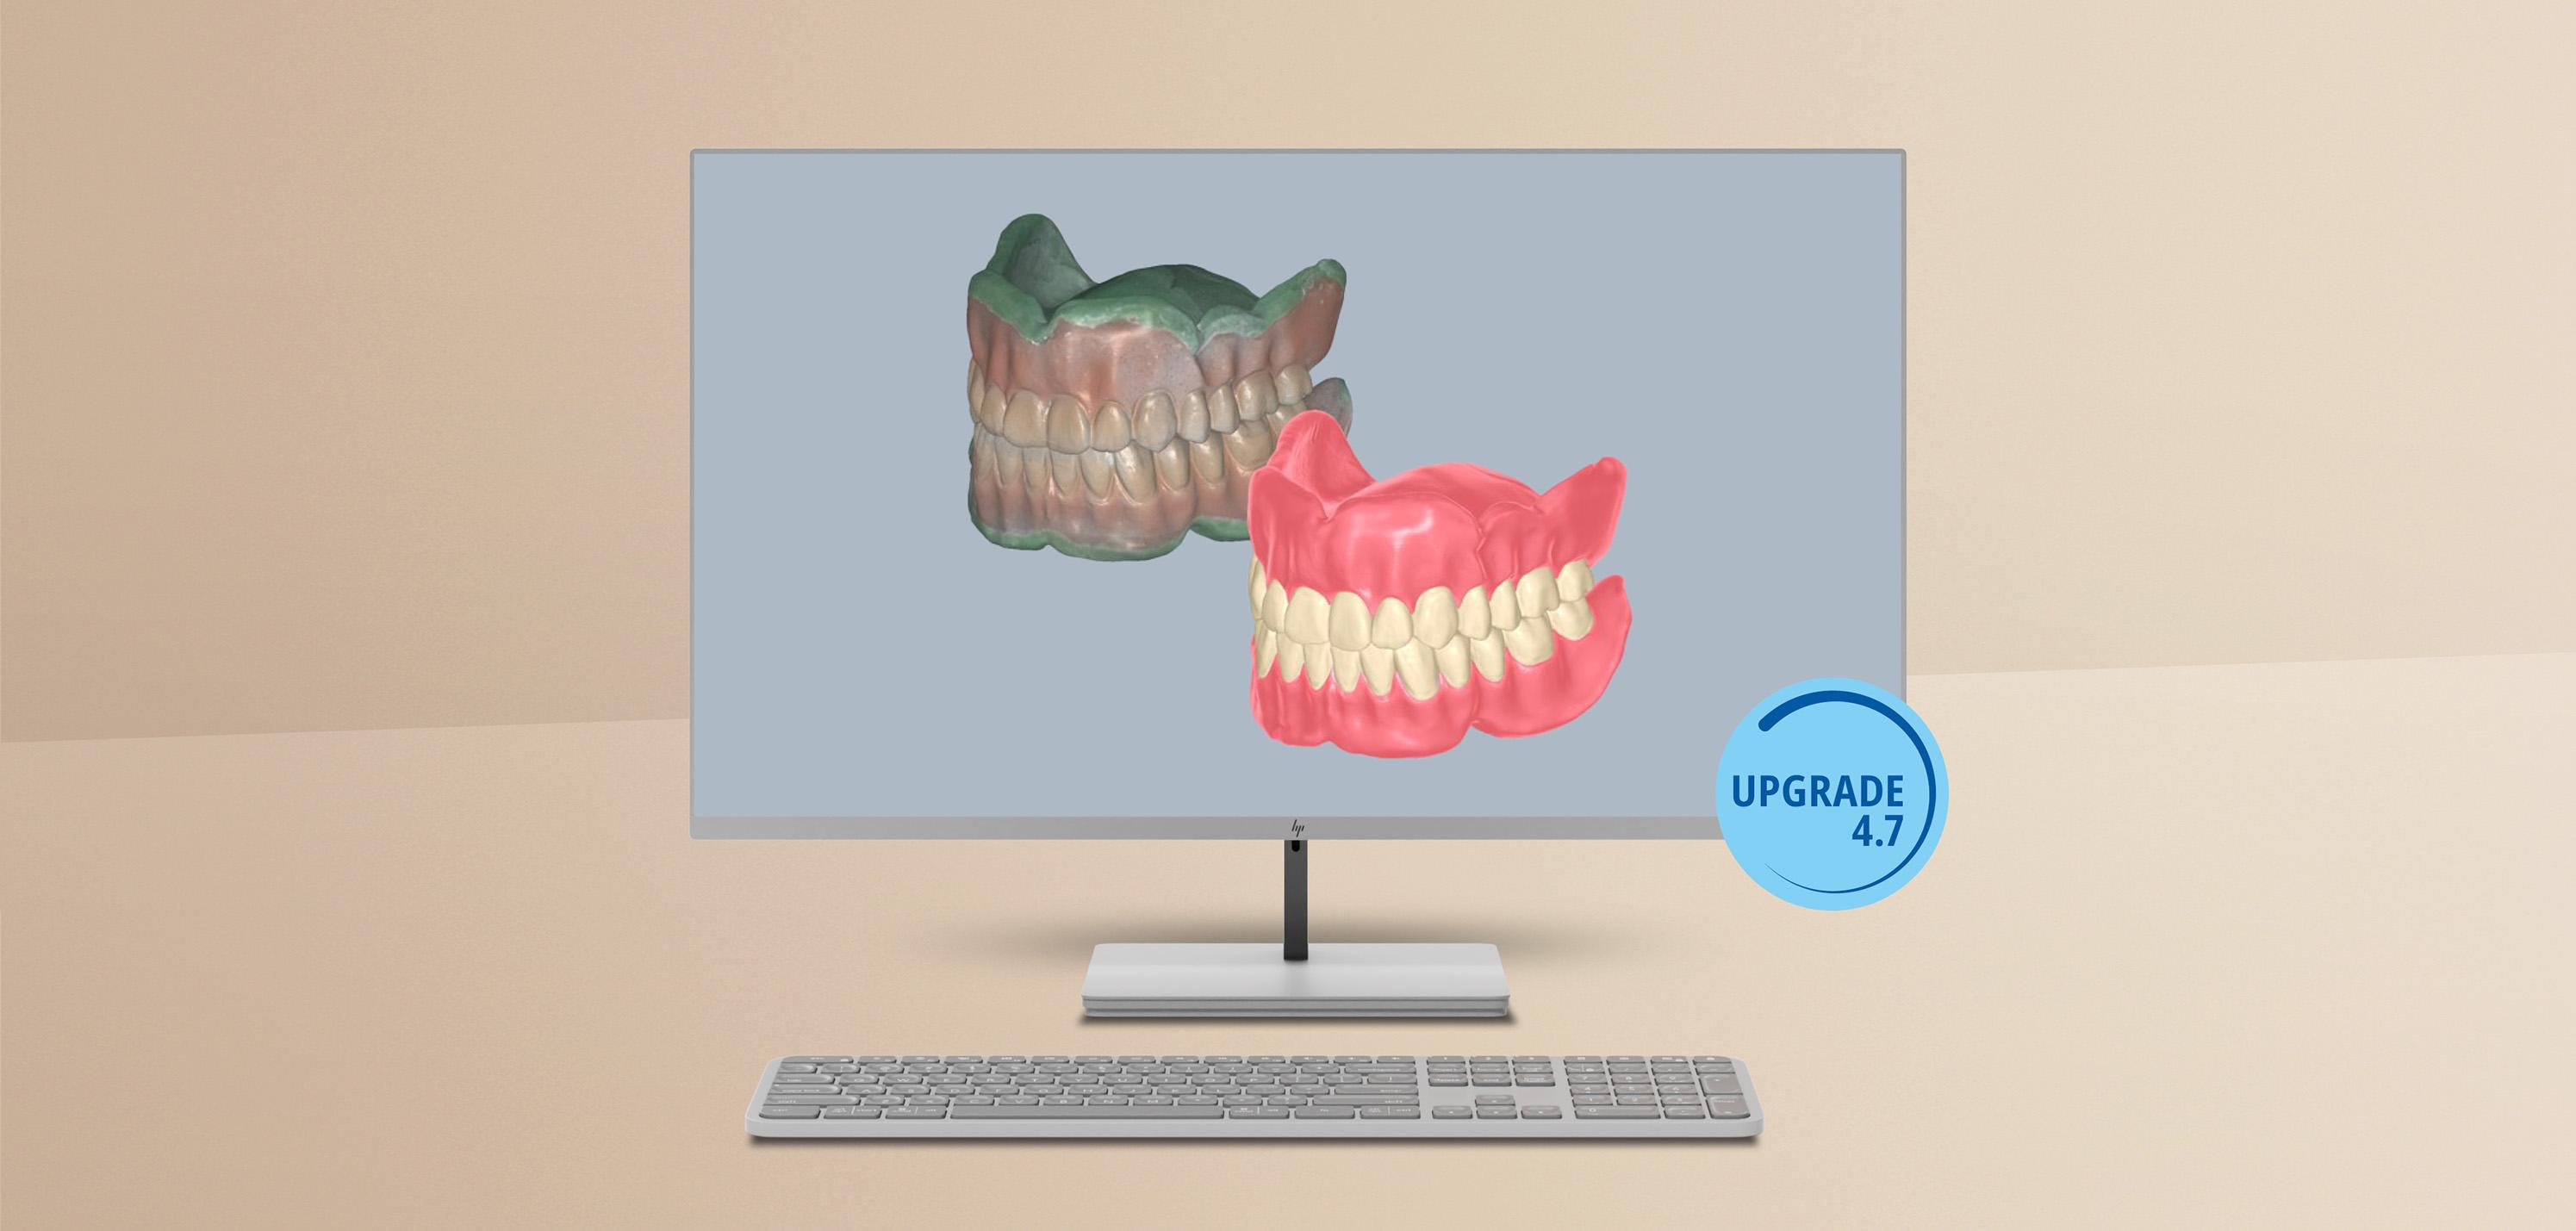 Up-to-date with the latest Ceramill Software Upgrade